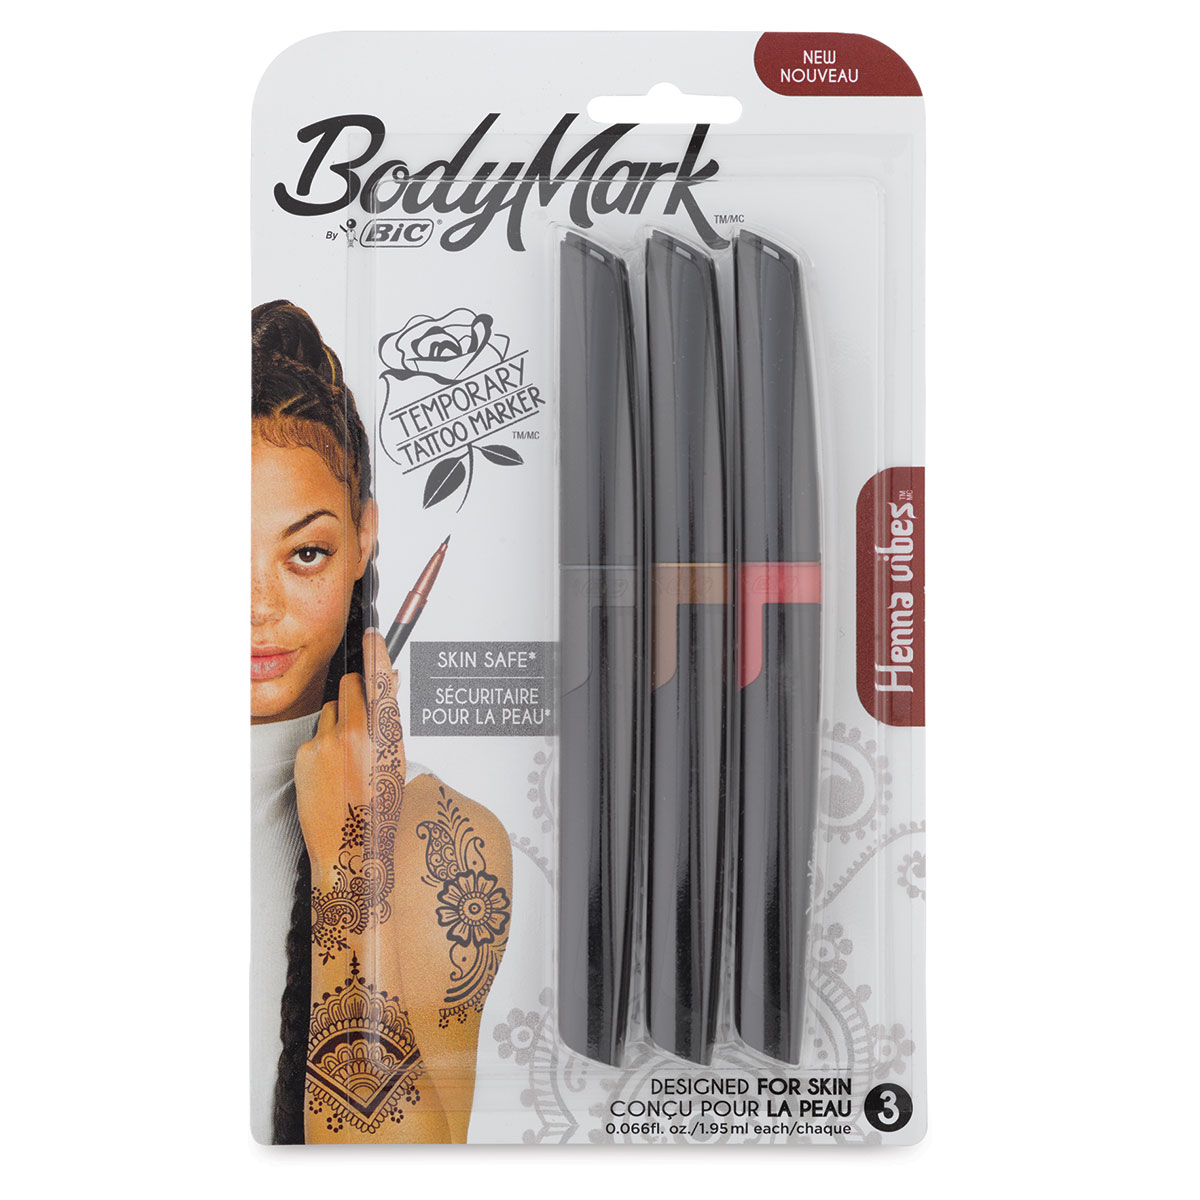 $10 Off Highly Rated BIC BodyMark Temporary Tattoo Markers on Amazon